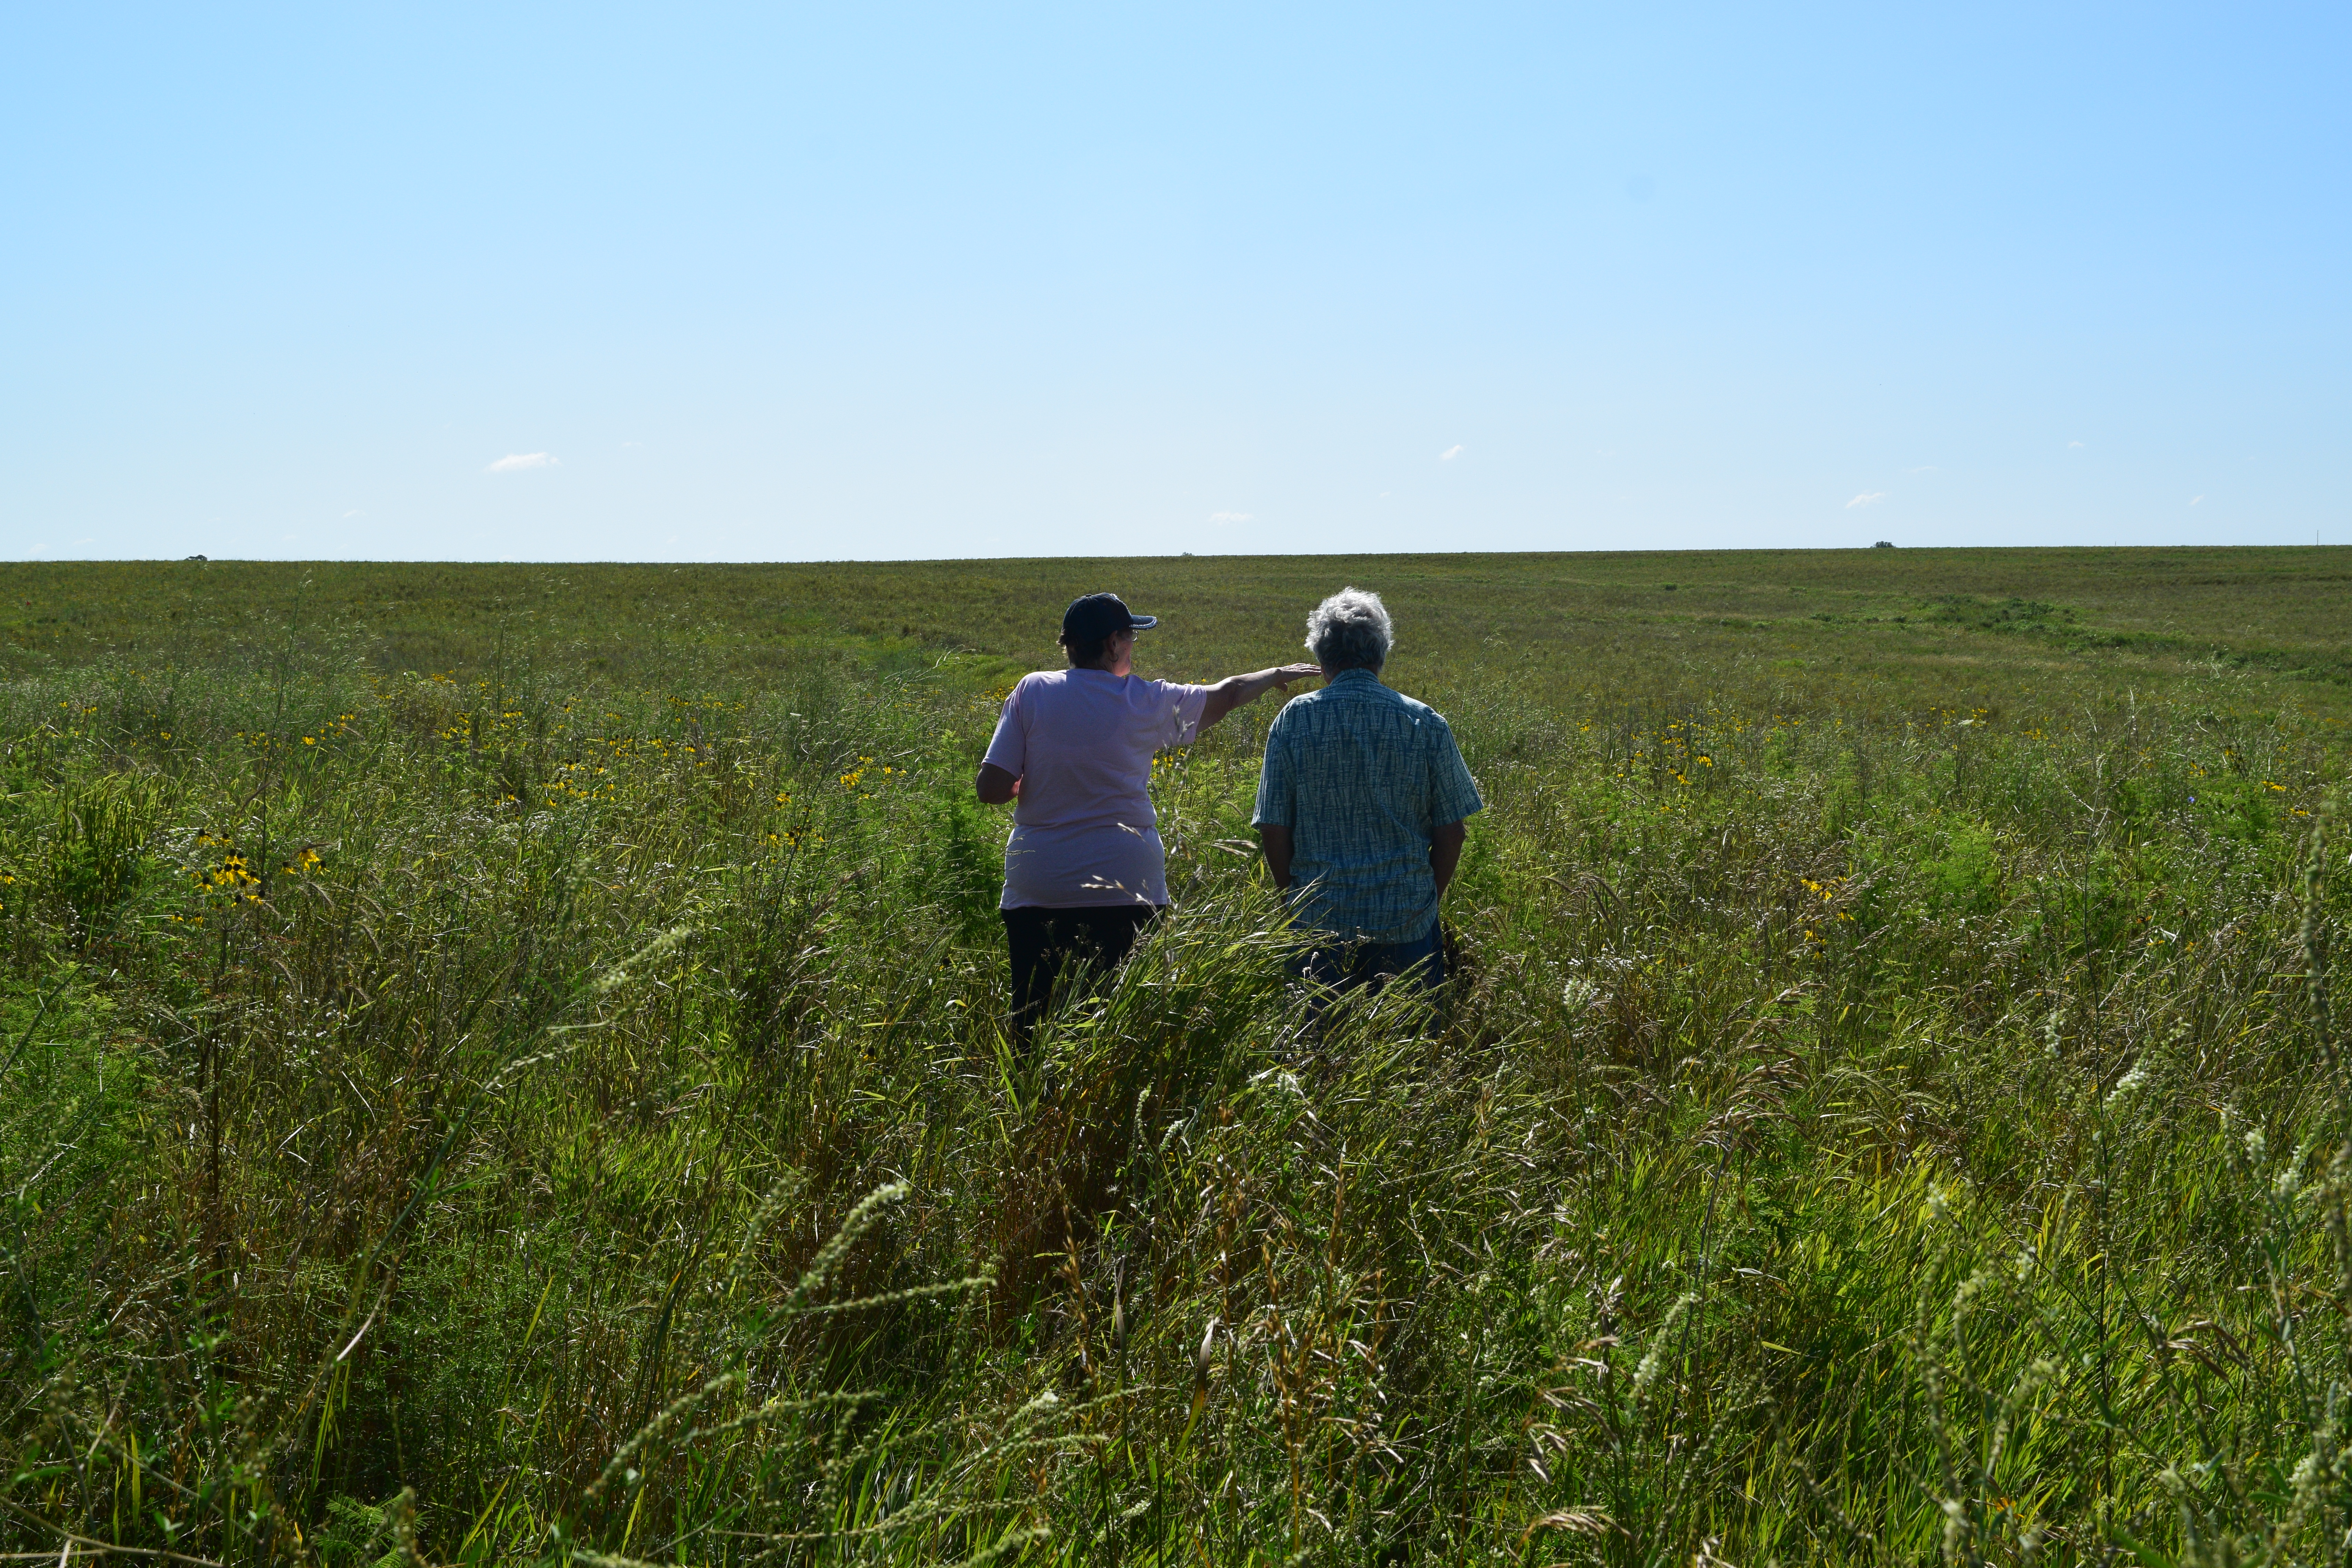 Phyllis Kimball, of Creston, looks over the 160 acres she enrolled in CRP pollinator mix in Ringgold County.